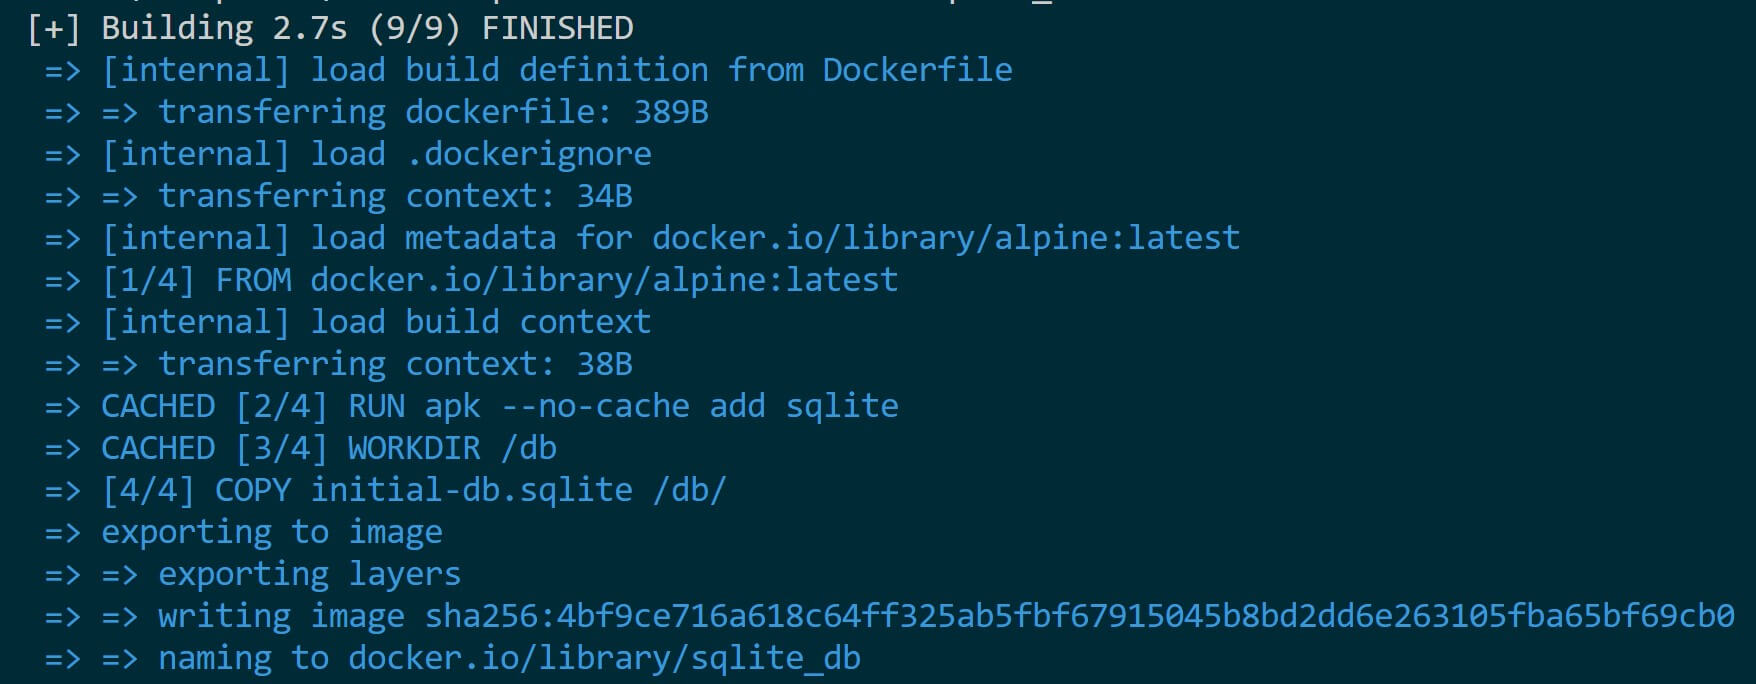 How to Run and use SQLite database with Docker containers